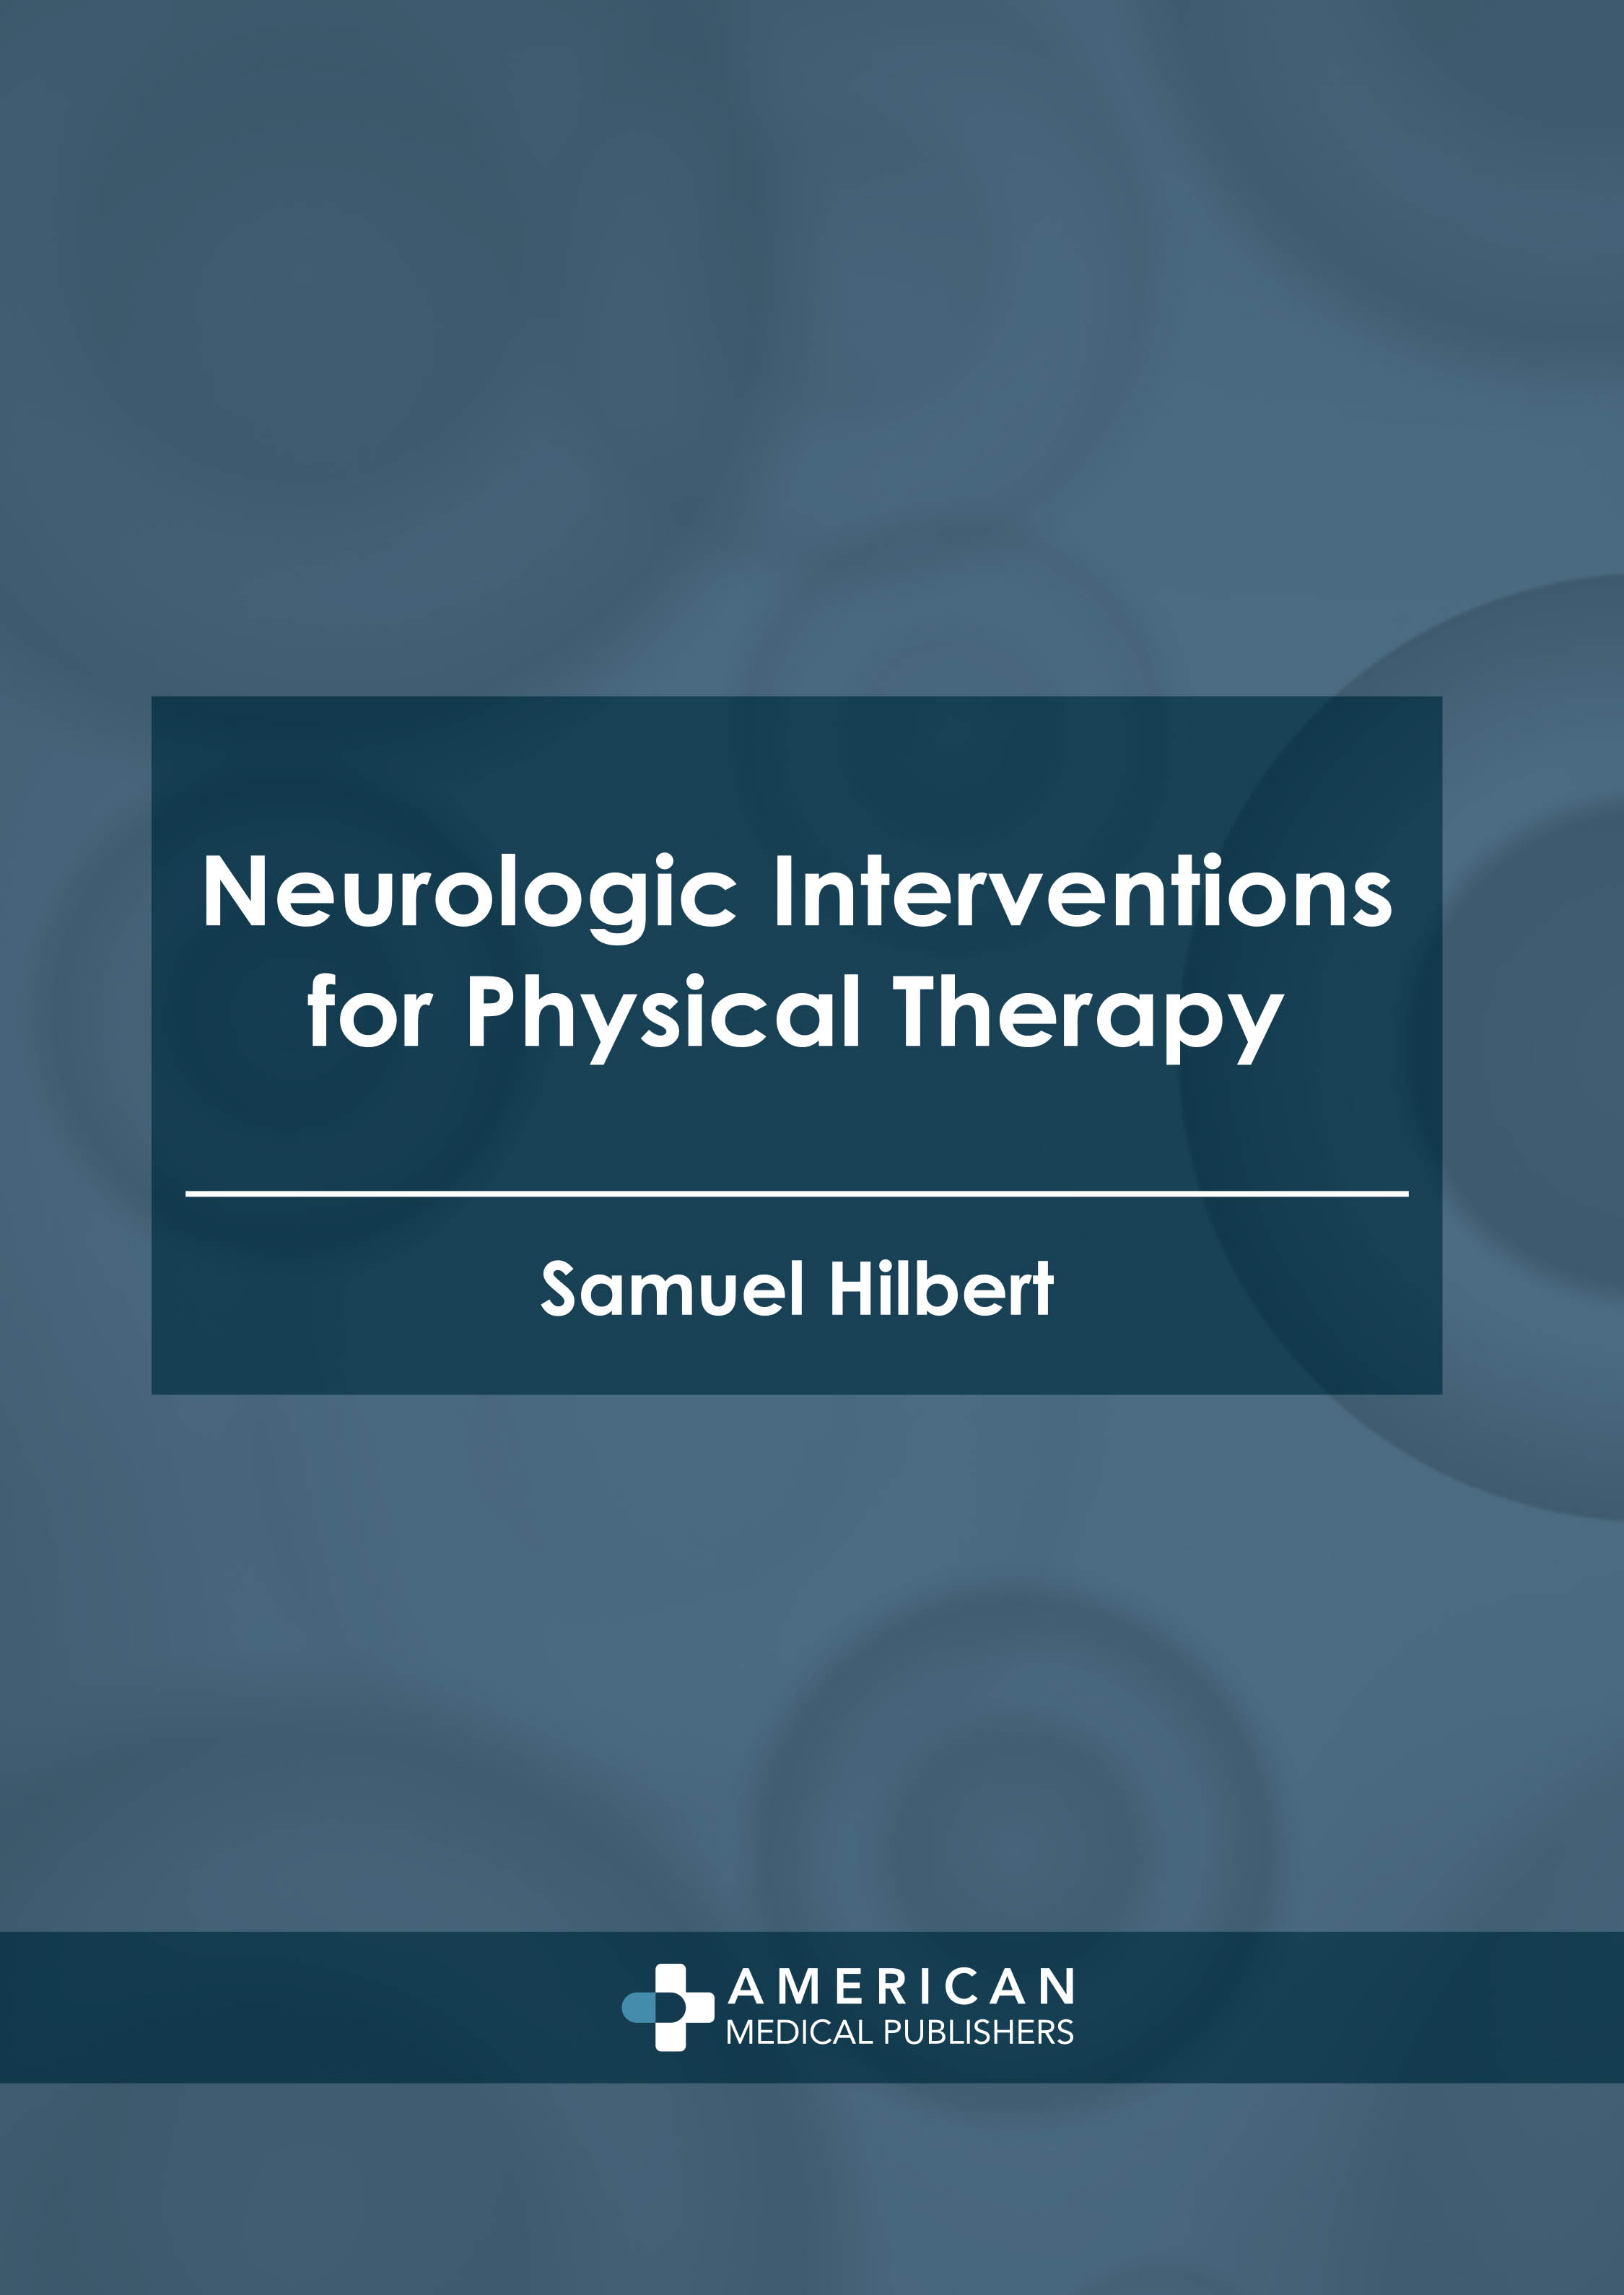 

medical-reference-books/pharmacology/neurologic-interventions-for-physical-therapy-9781639275434